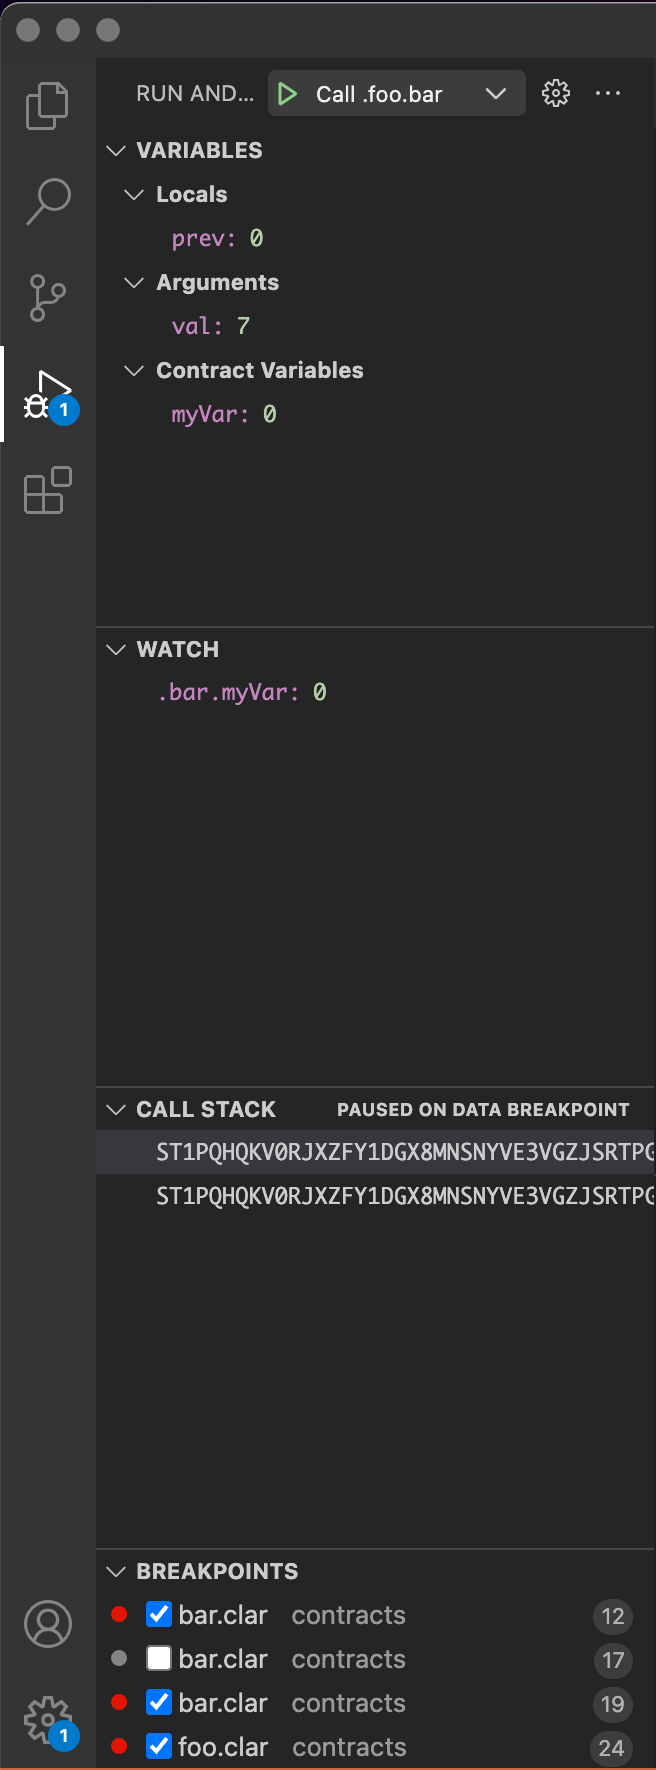 view of the sidebar, showing variables, watchpoints, and call stack